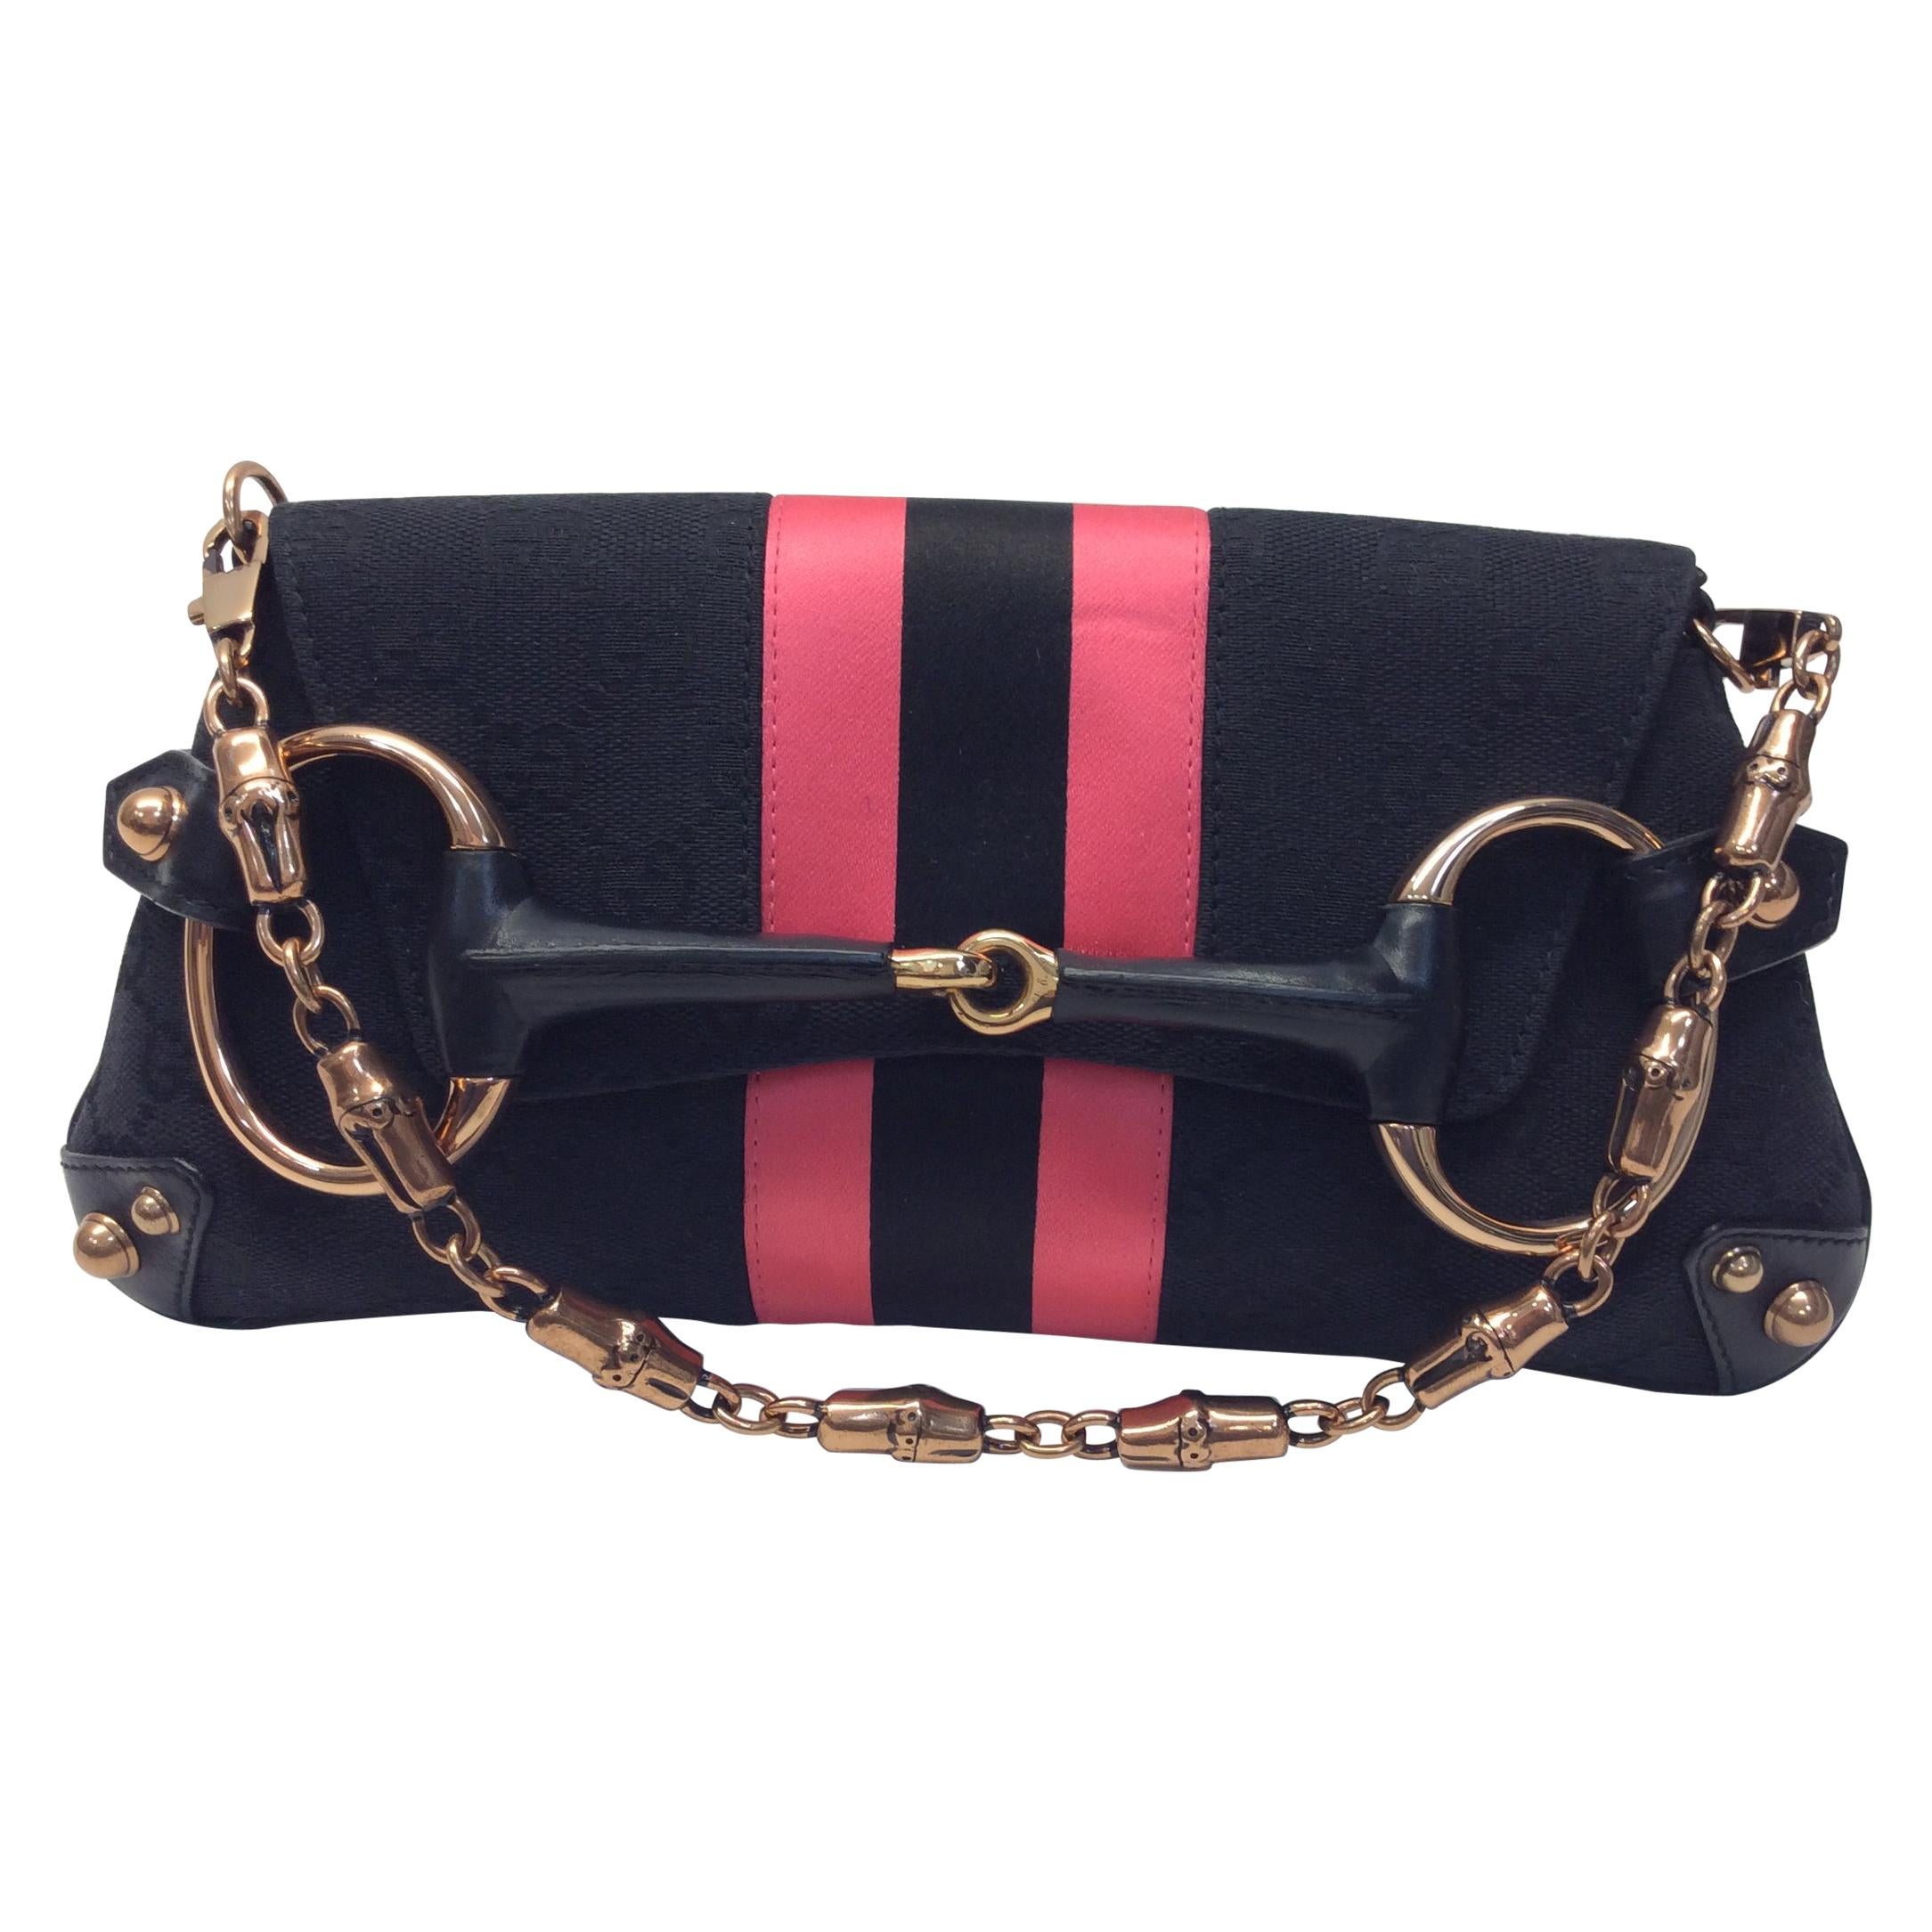 Gucci Black with Pink Stripes Small Shoulder Bag For Sale